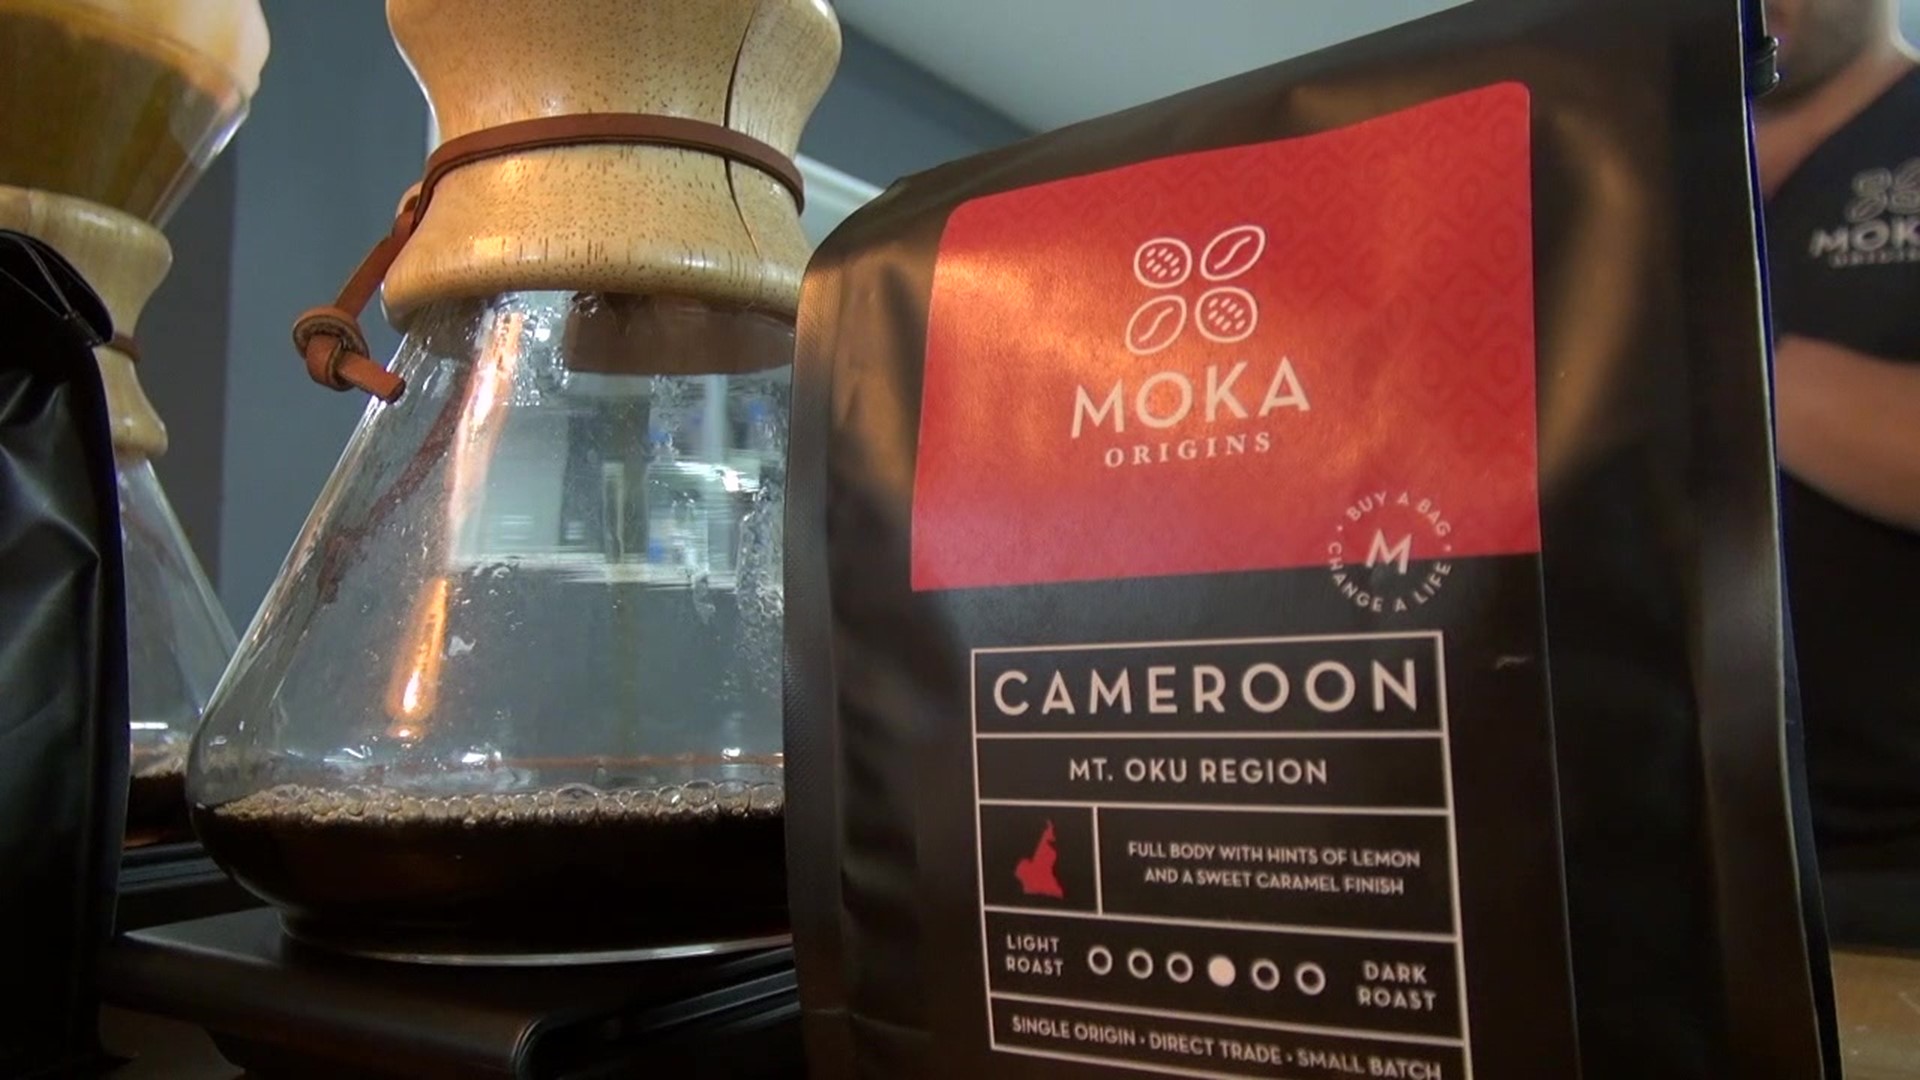 The owner of Moka Origins is looking forward and hoping for a return to normalcy.